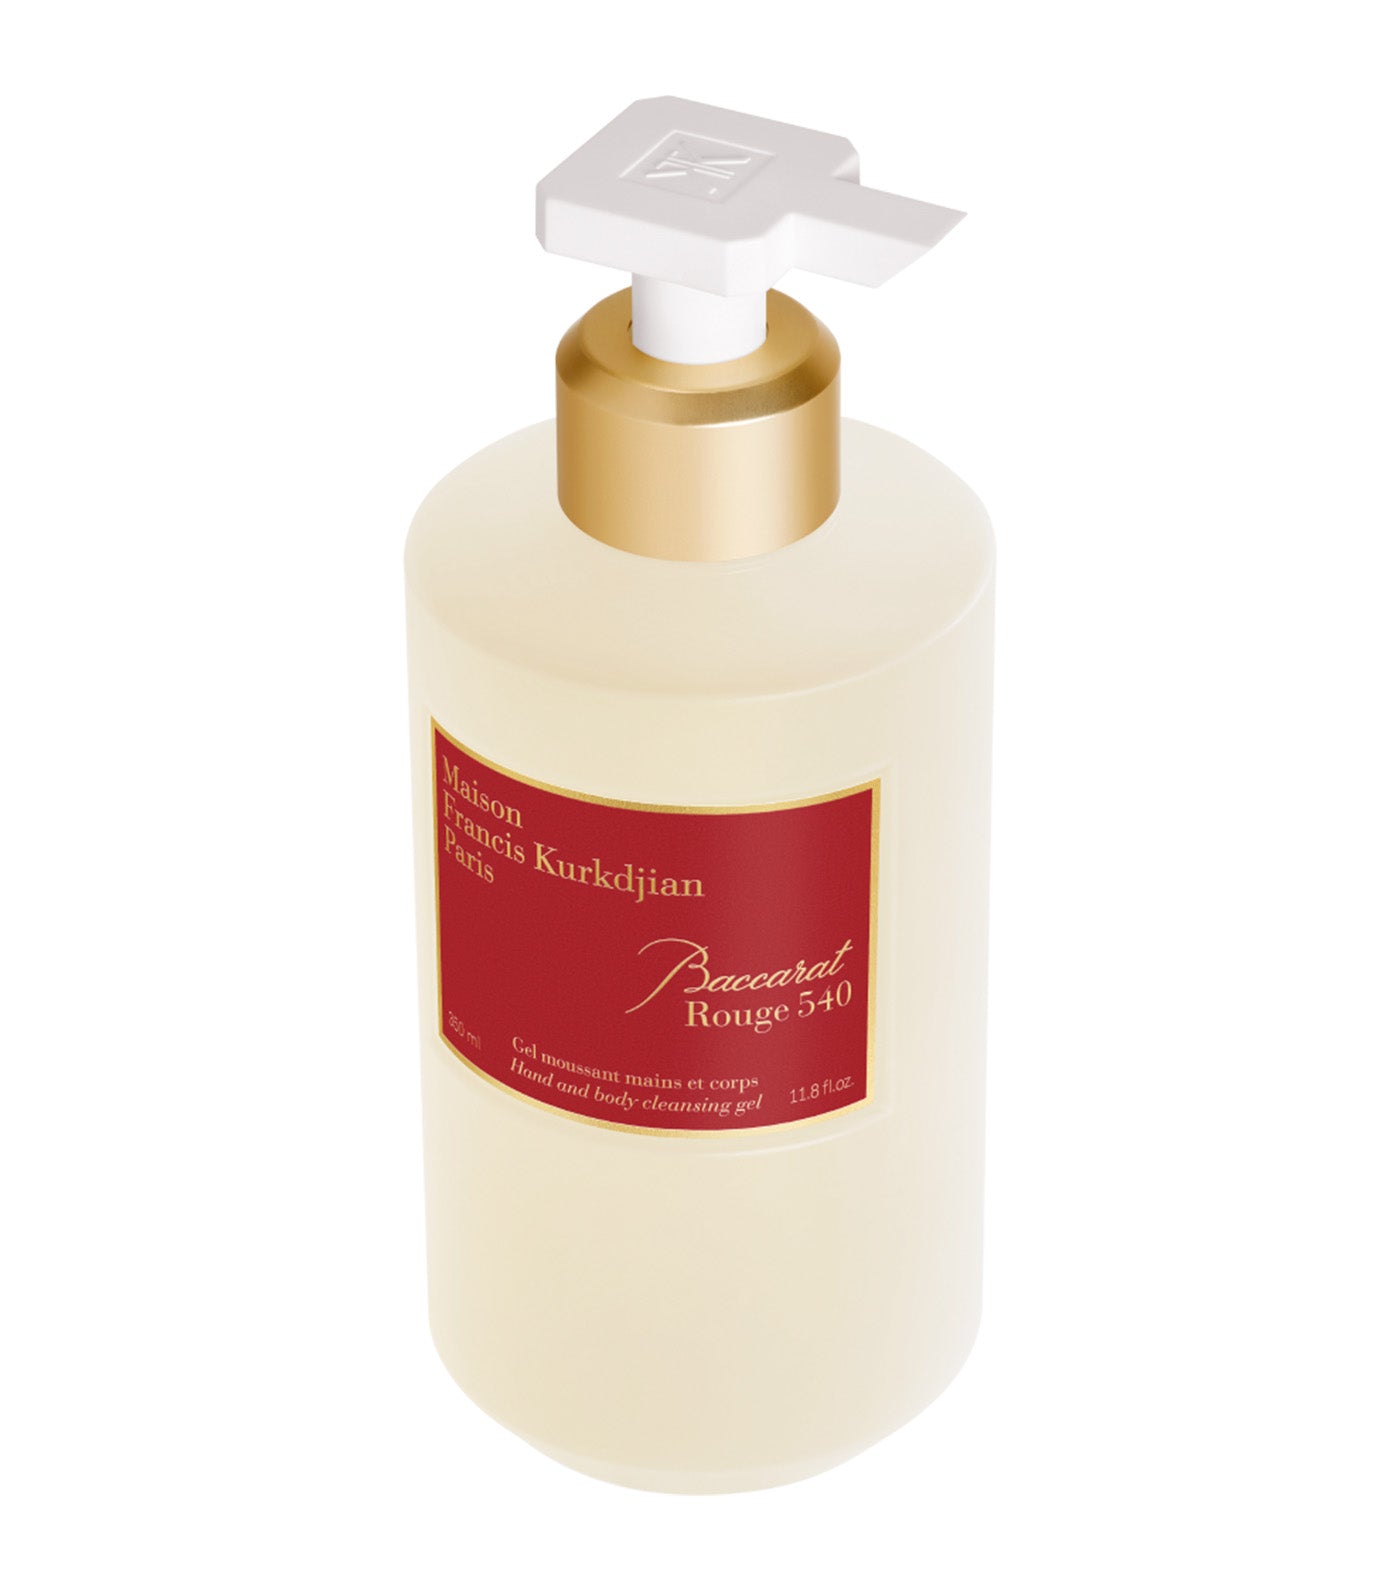 Baccarat Rouge 540 Hand and Body Cleansing Gel